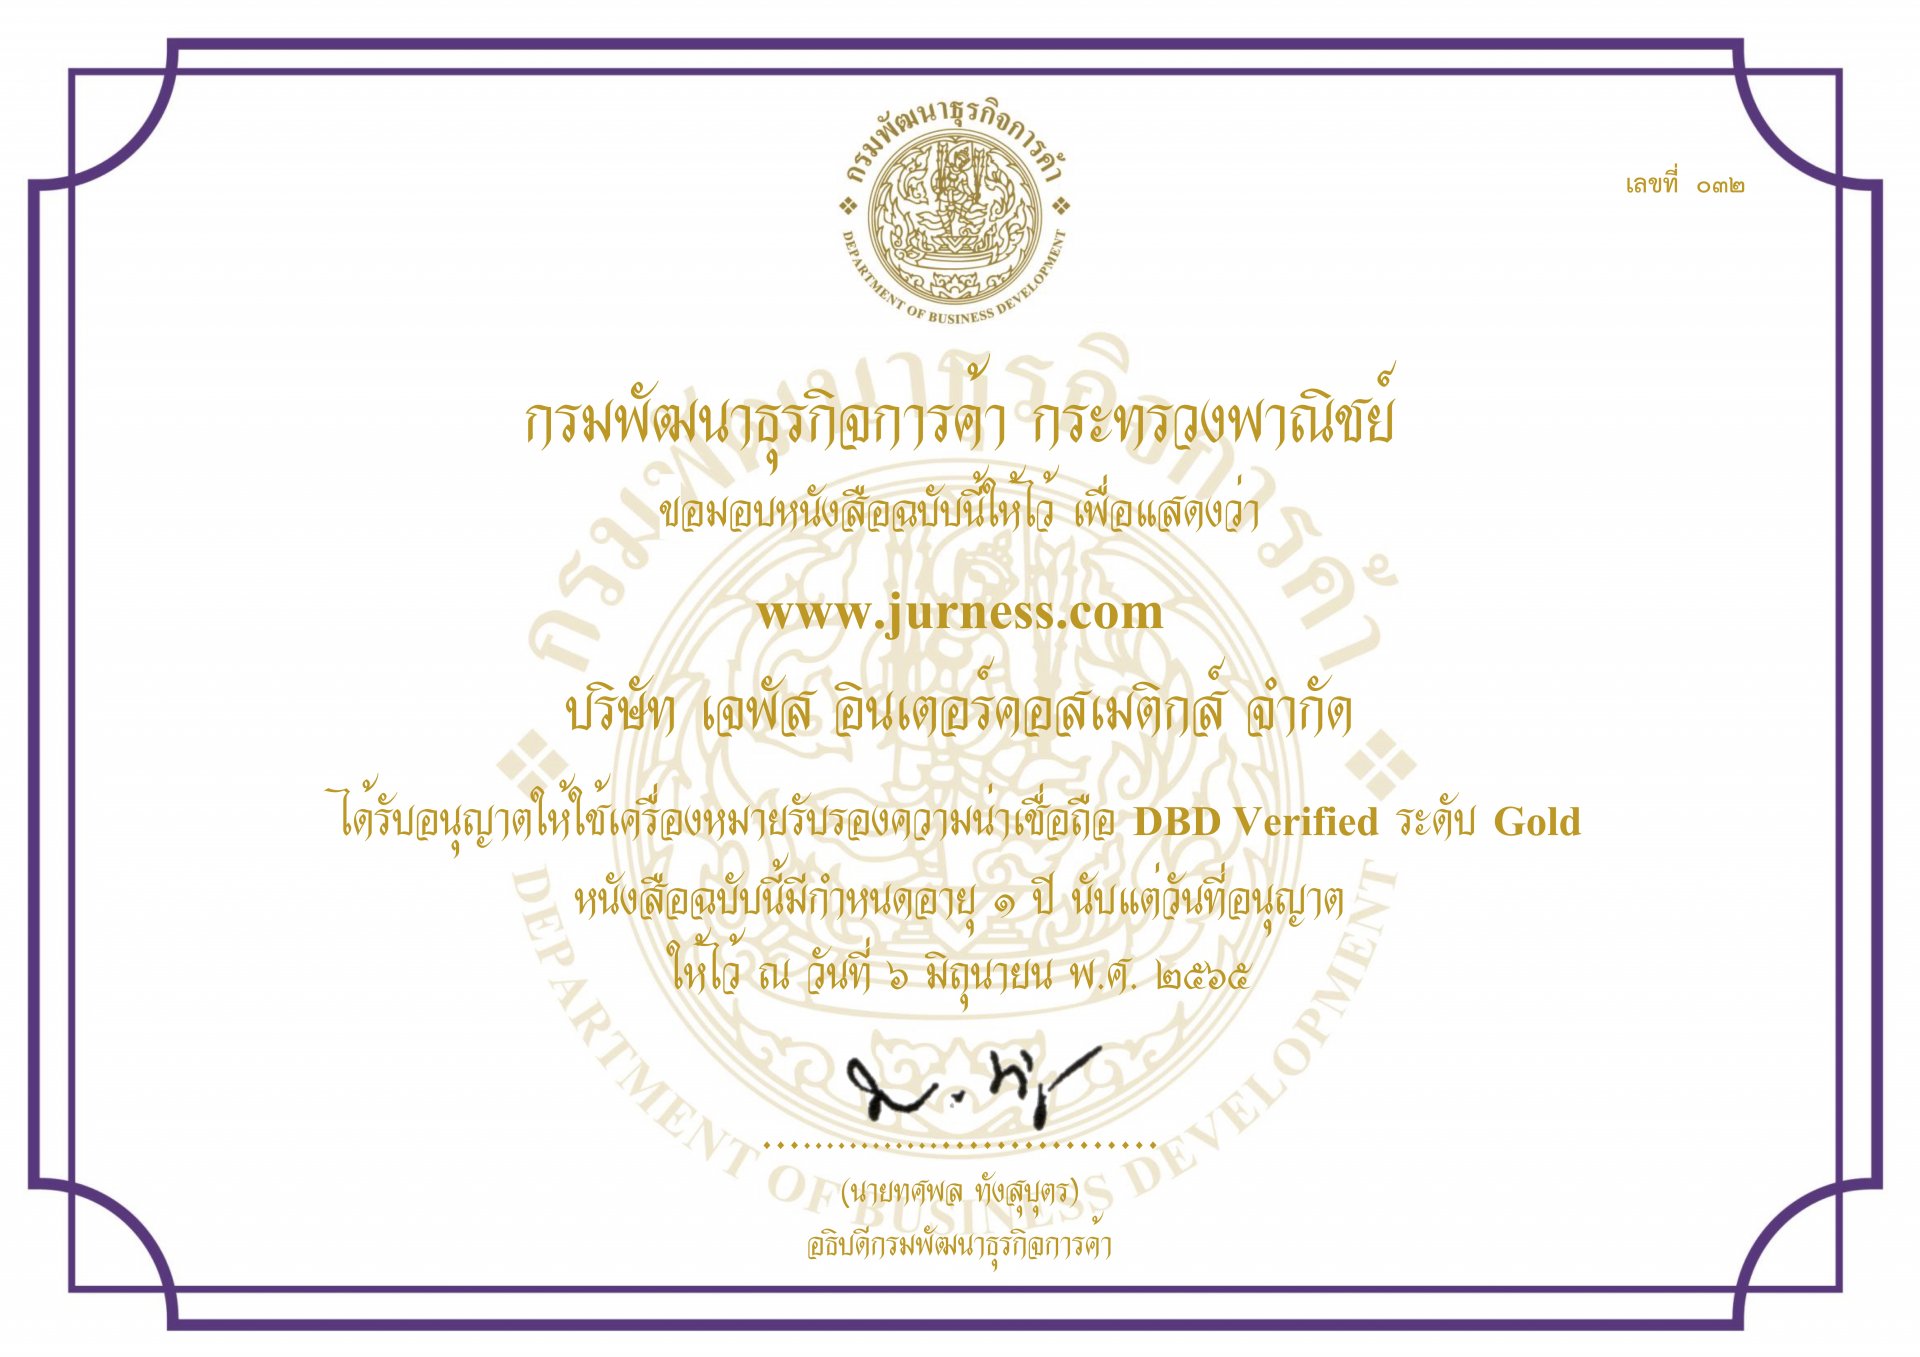 Deparment of Business Development gives the DBD verified mark " Gold level" to  jurness.com for the second year.